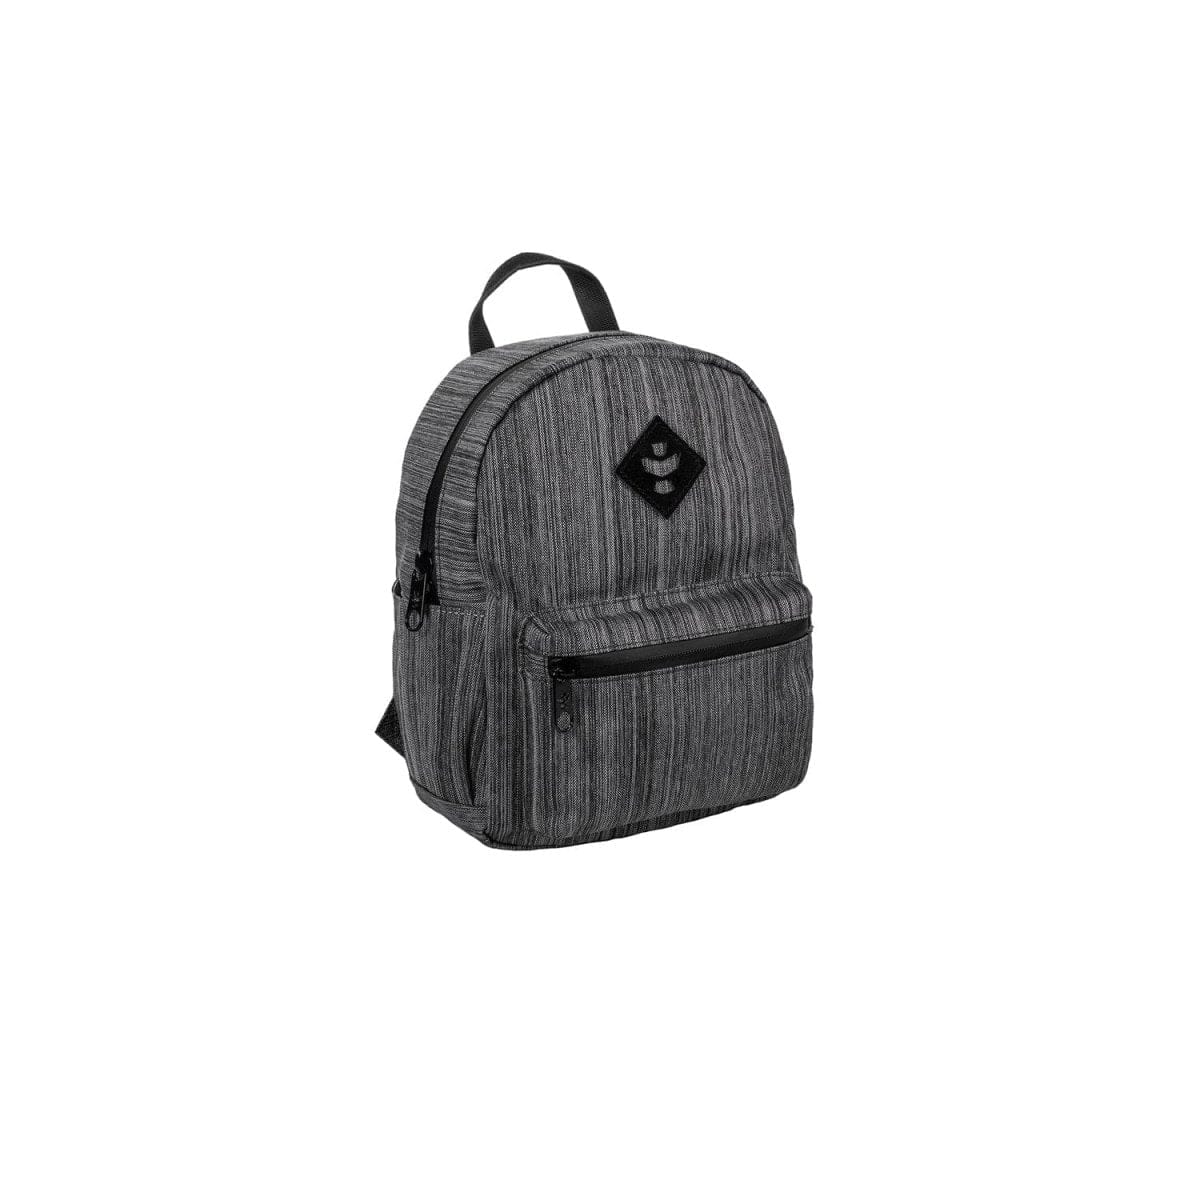 Revelry Supply Travel Bag Striped Dark Grey The Shorty - Smell Proof Mini Backpack